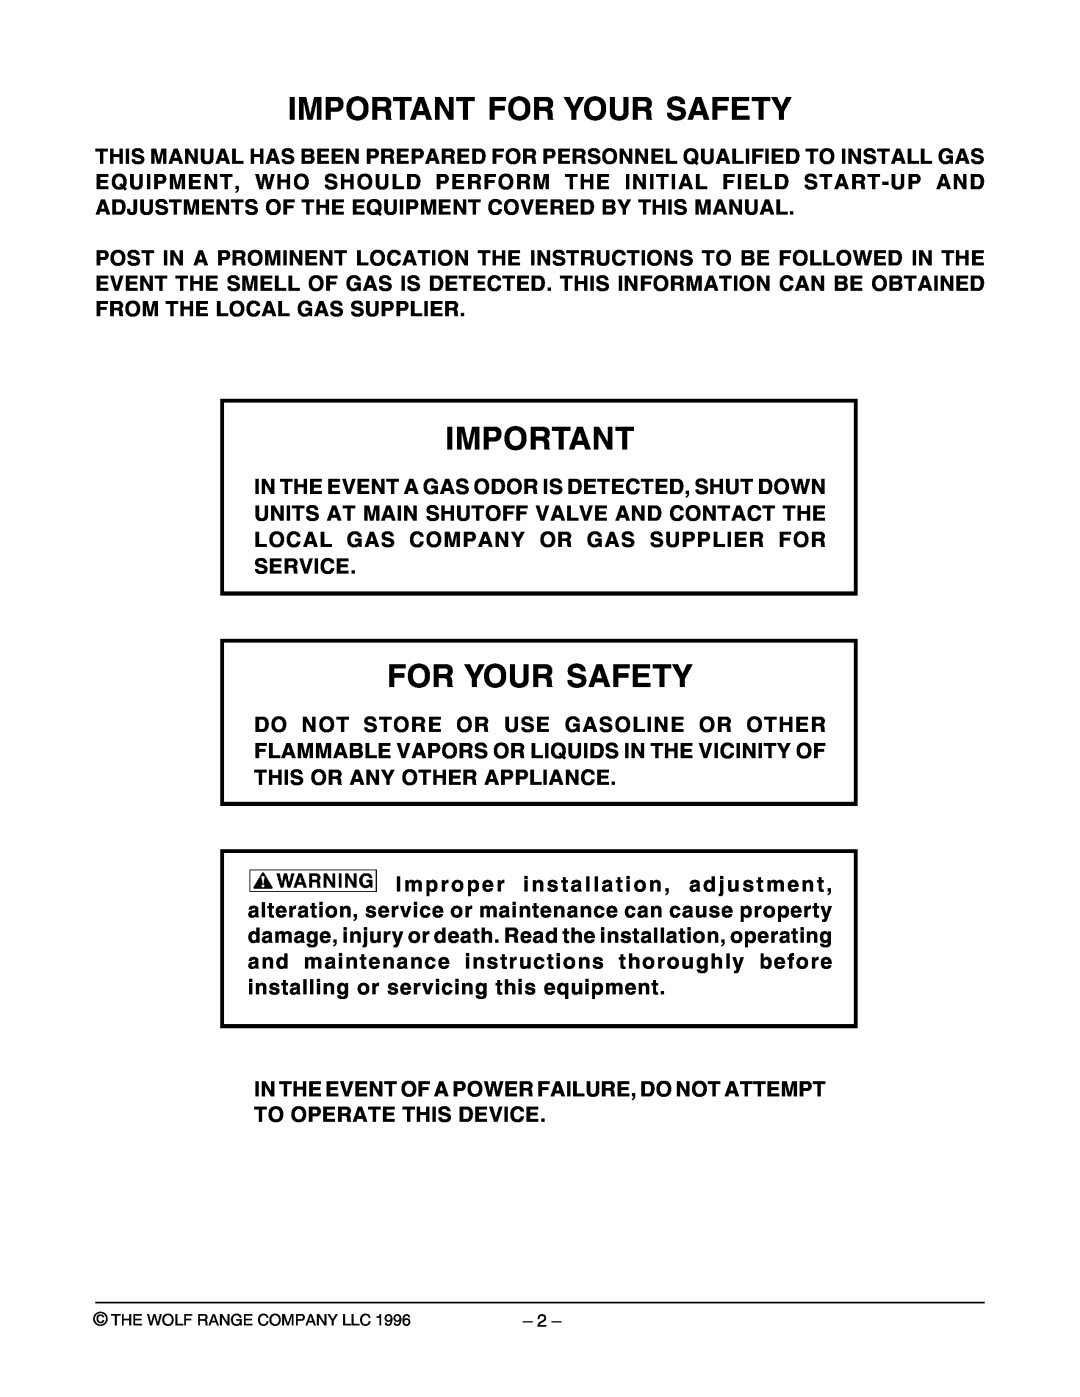 Wolf Appliance Company WKGHC ML-767590, WKGHD ML-767589 owner manual Important For Your Safety 